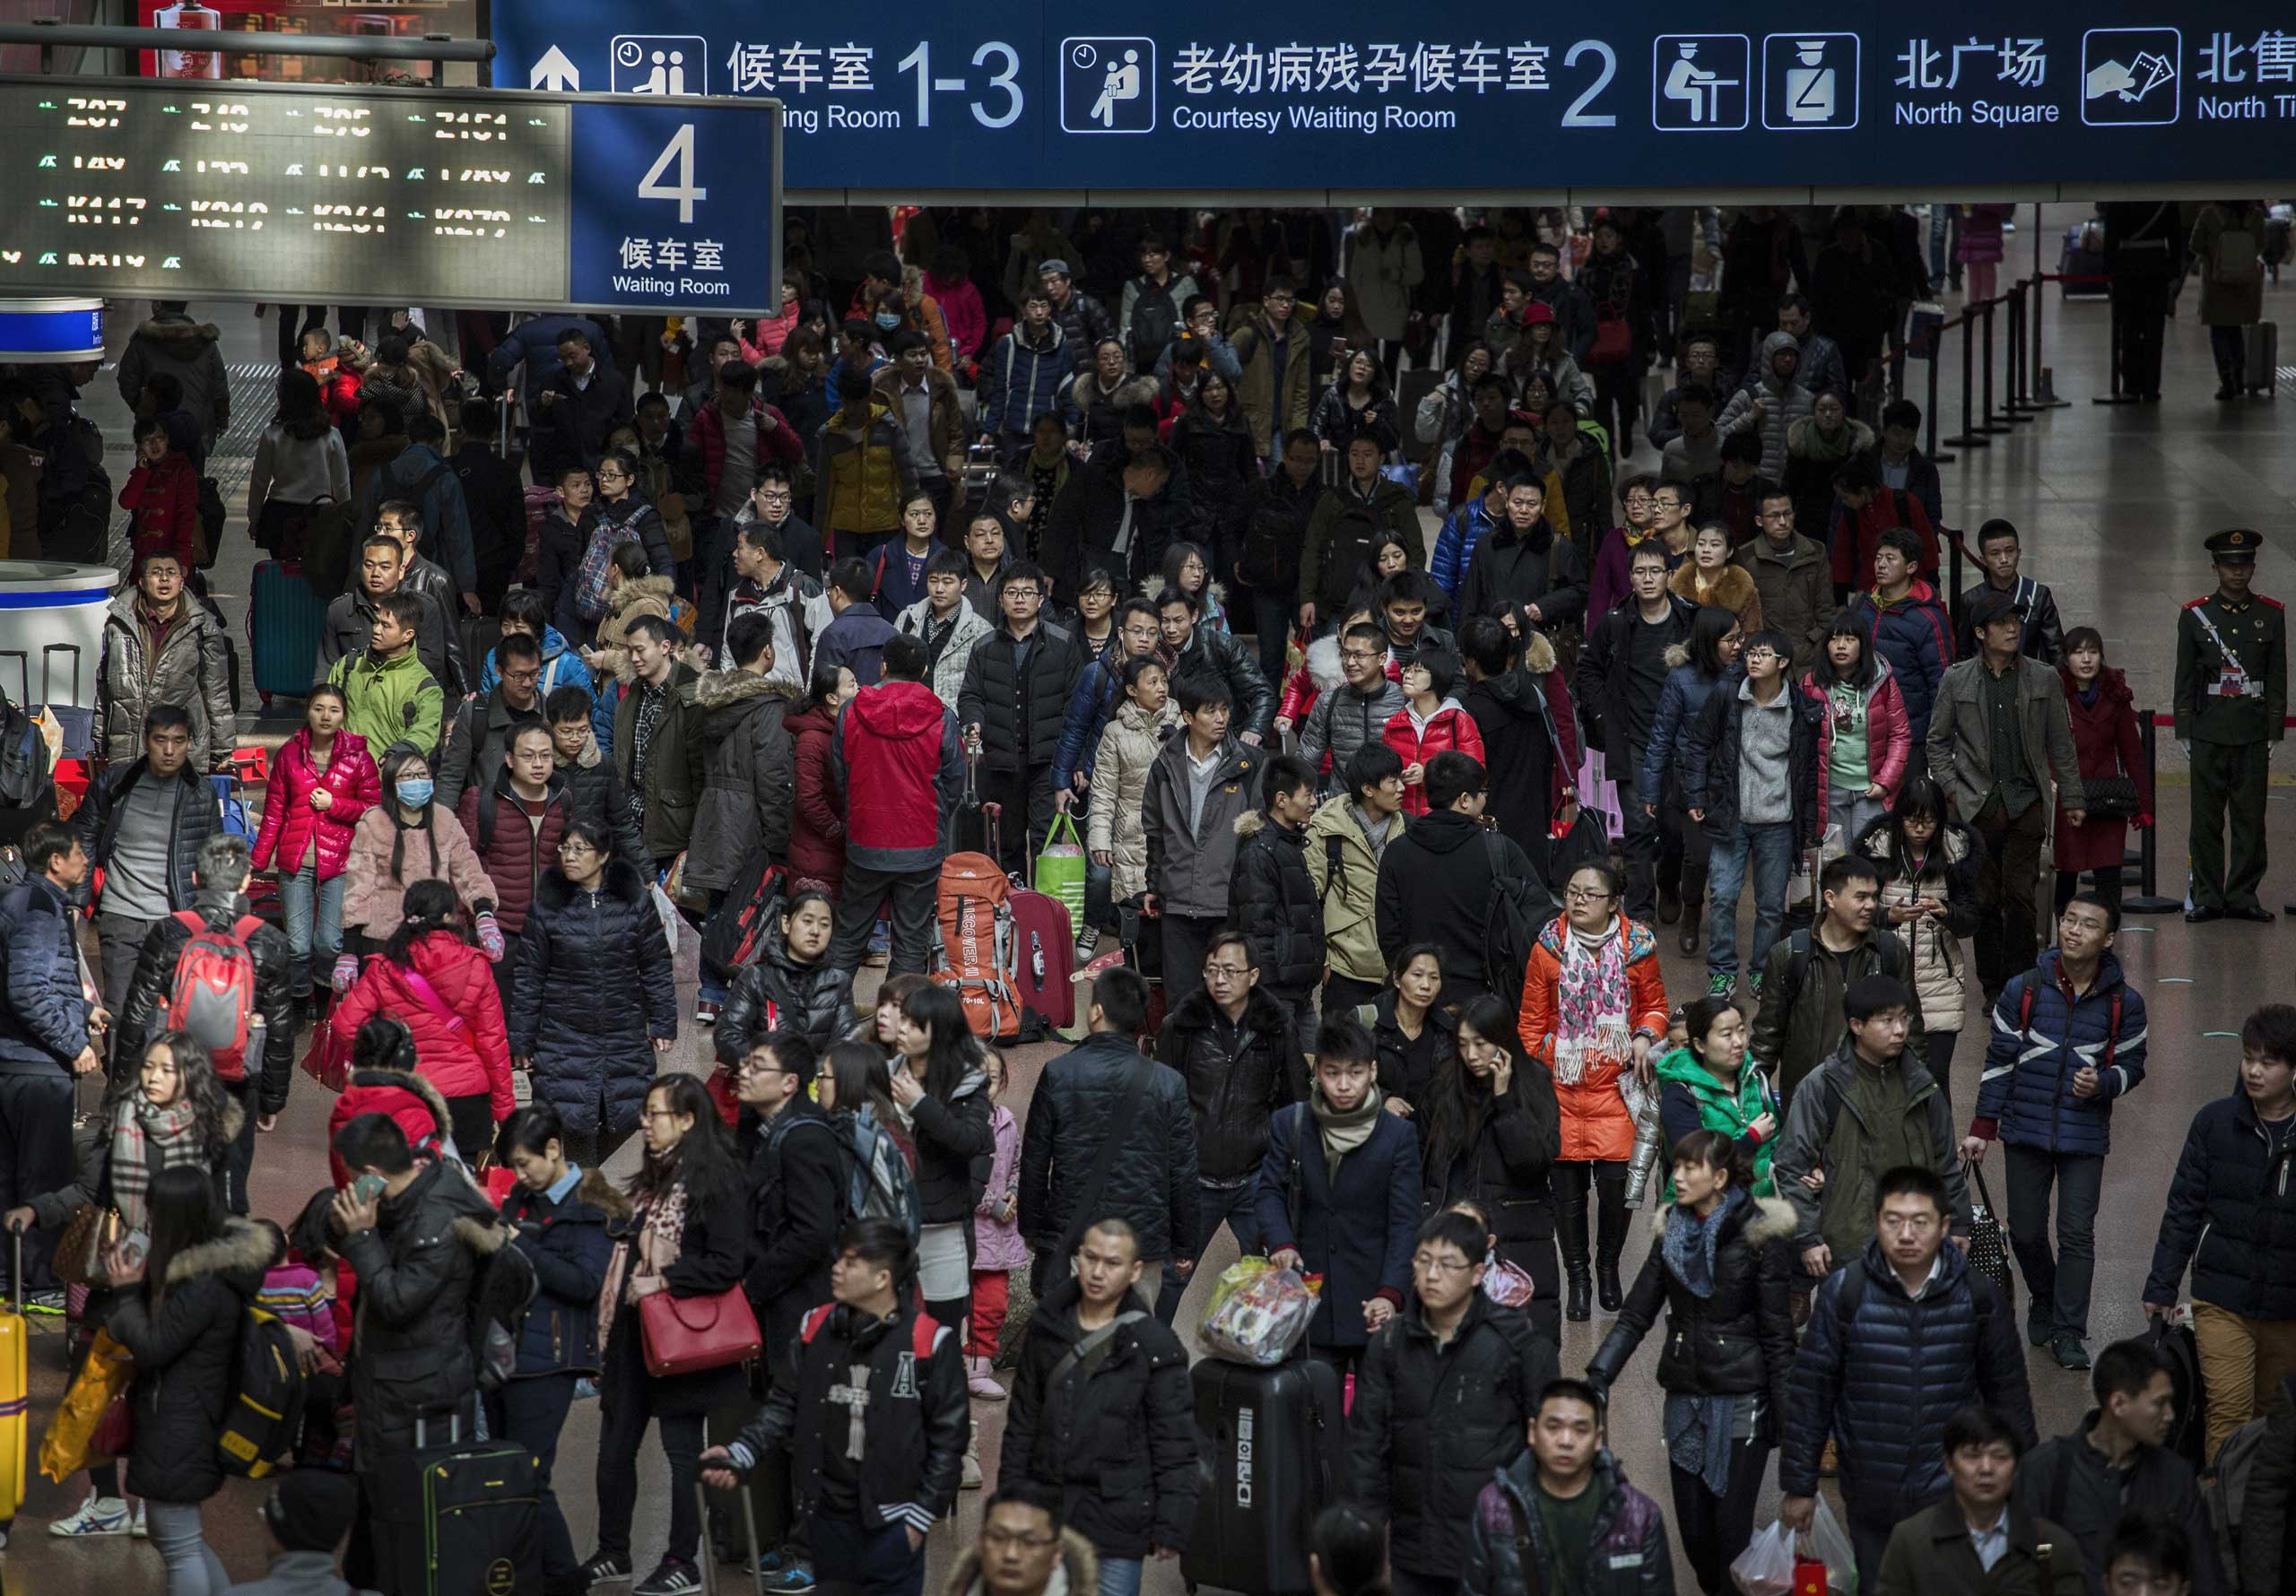 Travelers crowd the station while leaving for the  Spring Festival at a local railway station on Feb. 17, 2015 in Beijing.